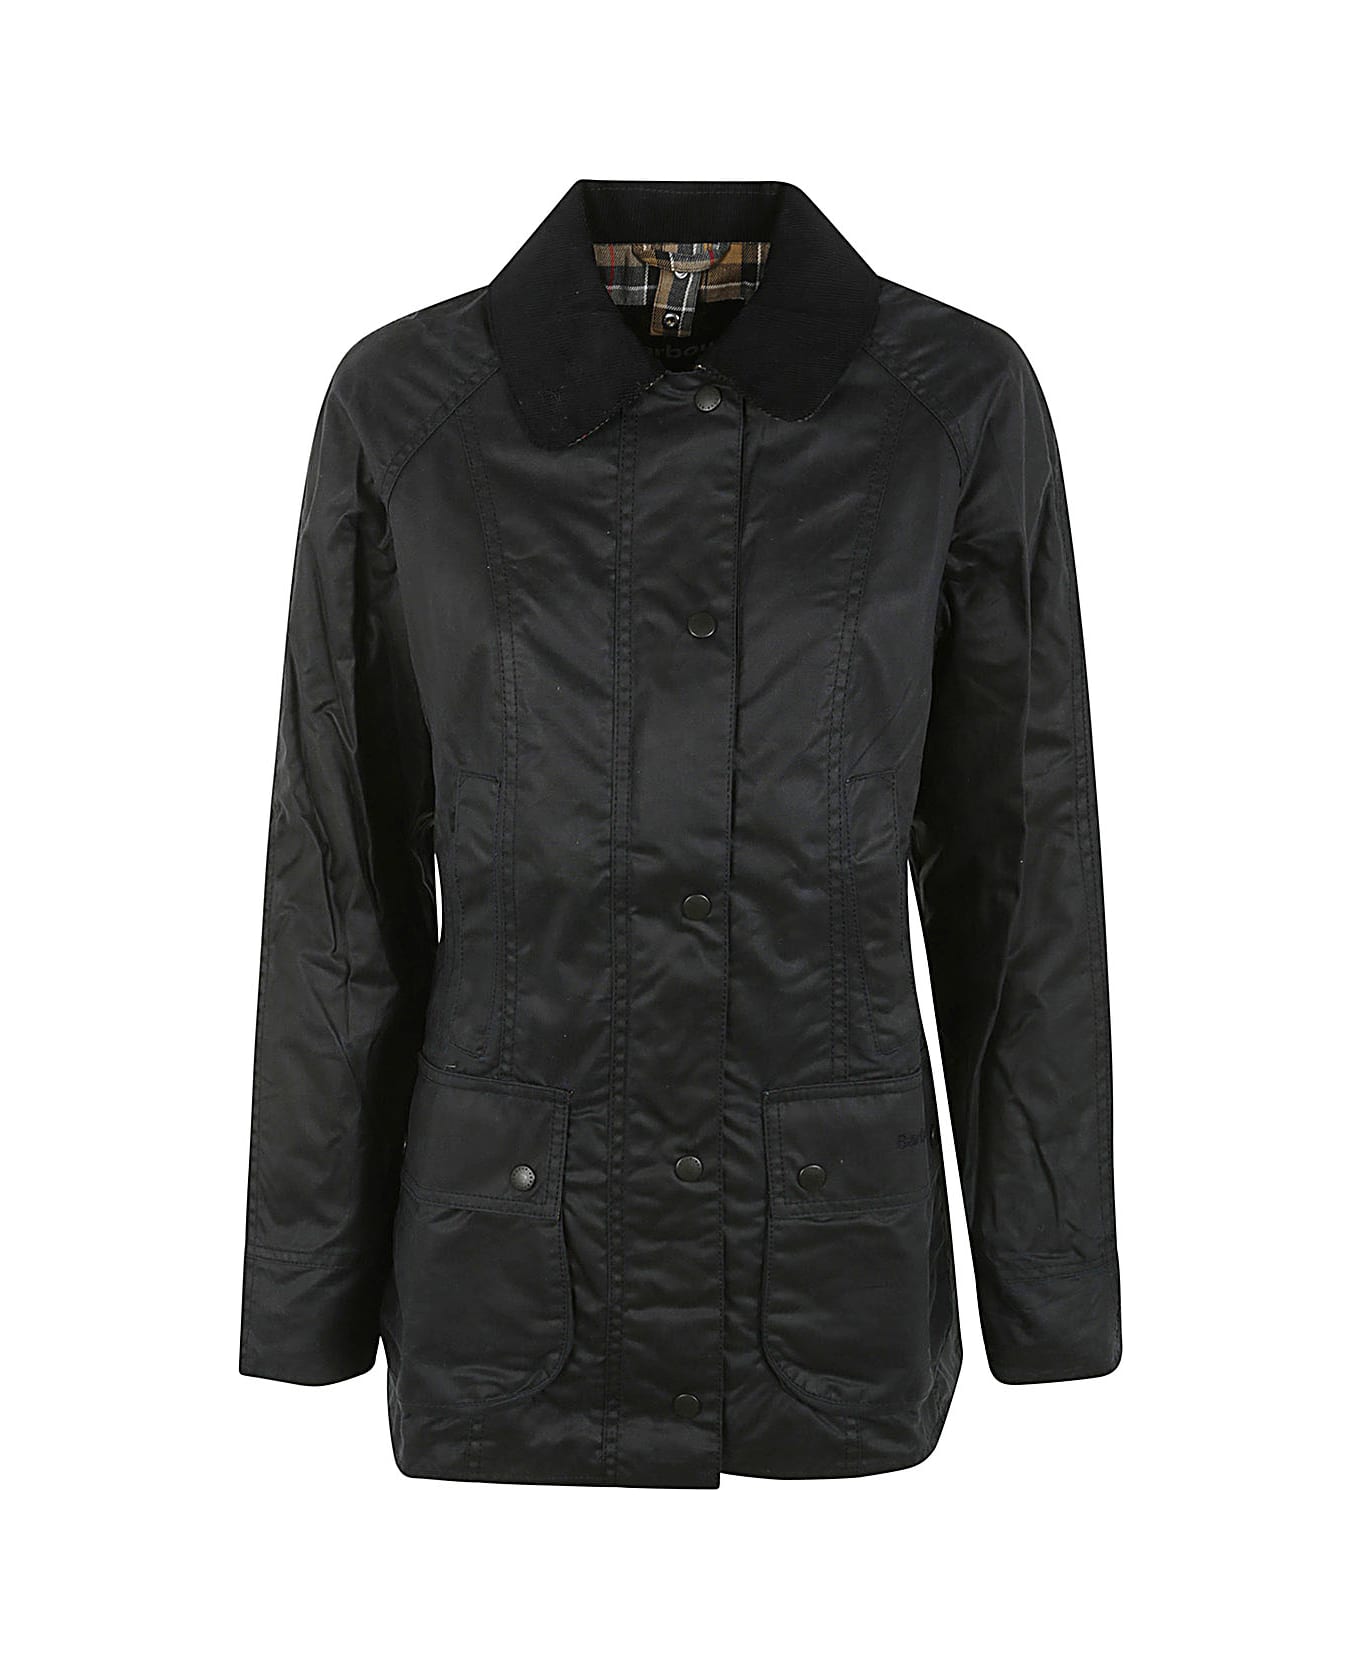 Barbour Beadnell Jacket - Navy